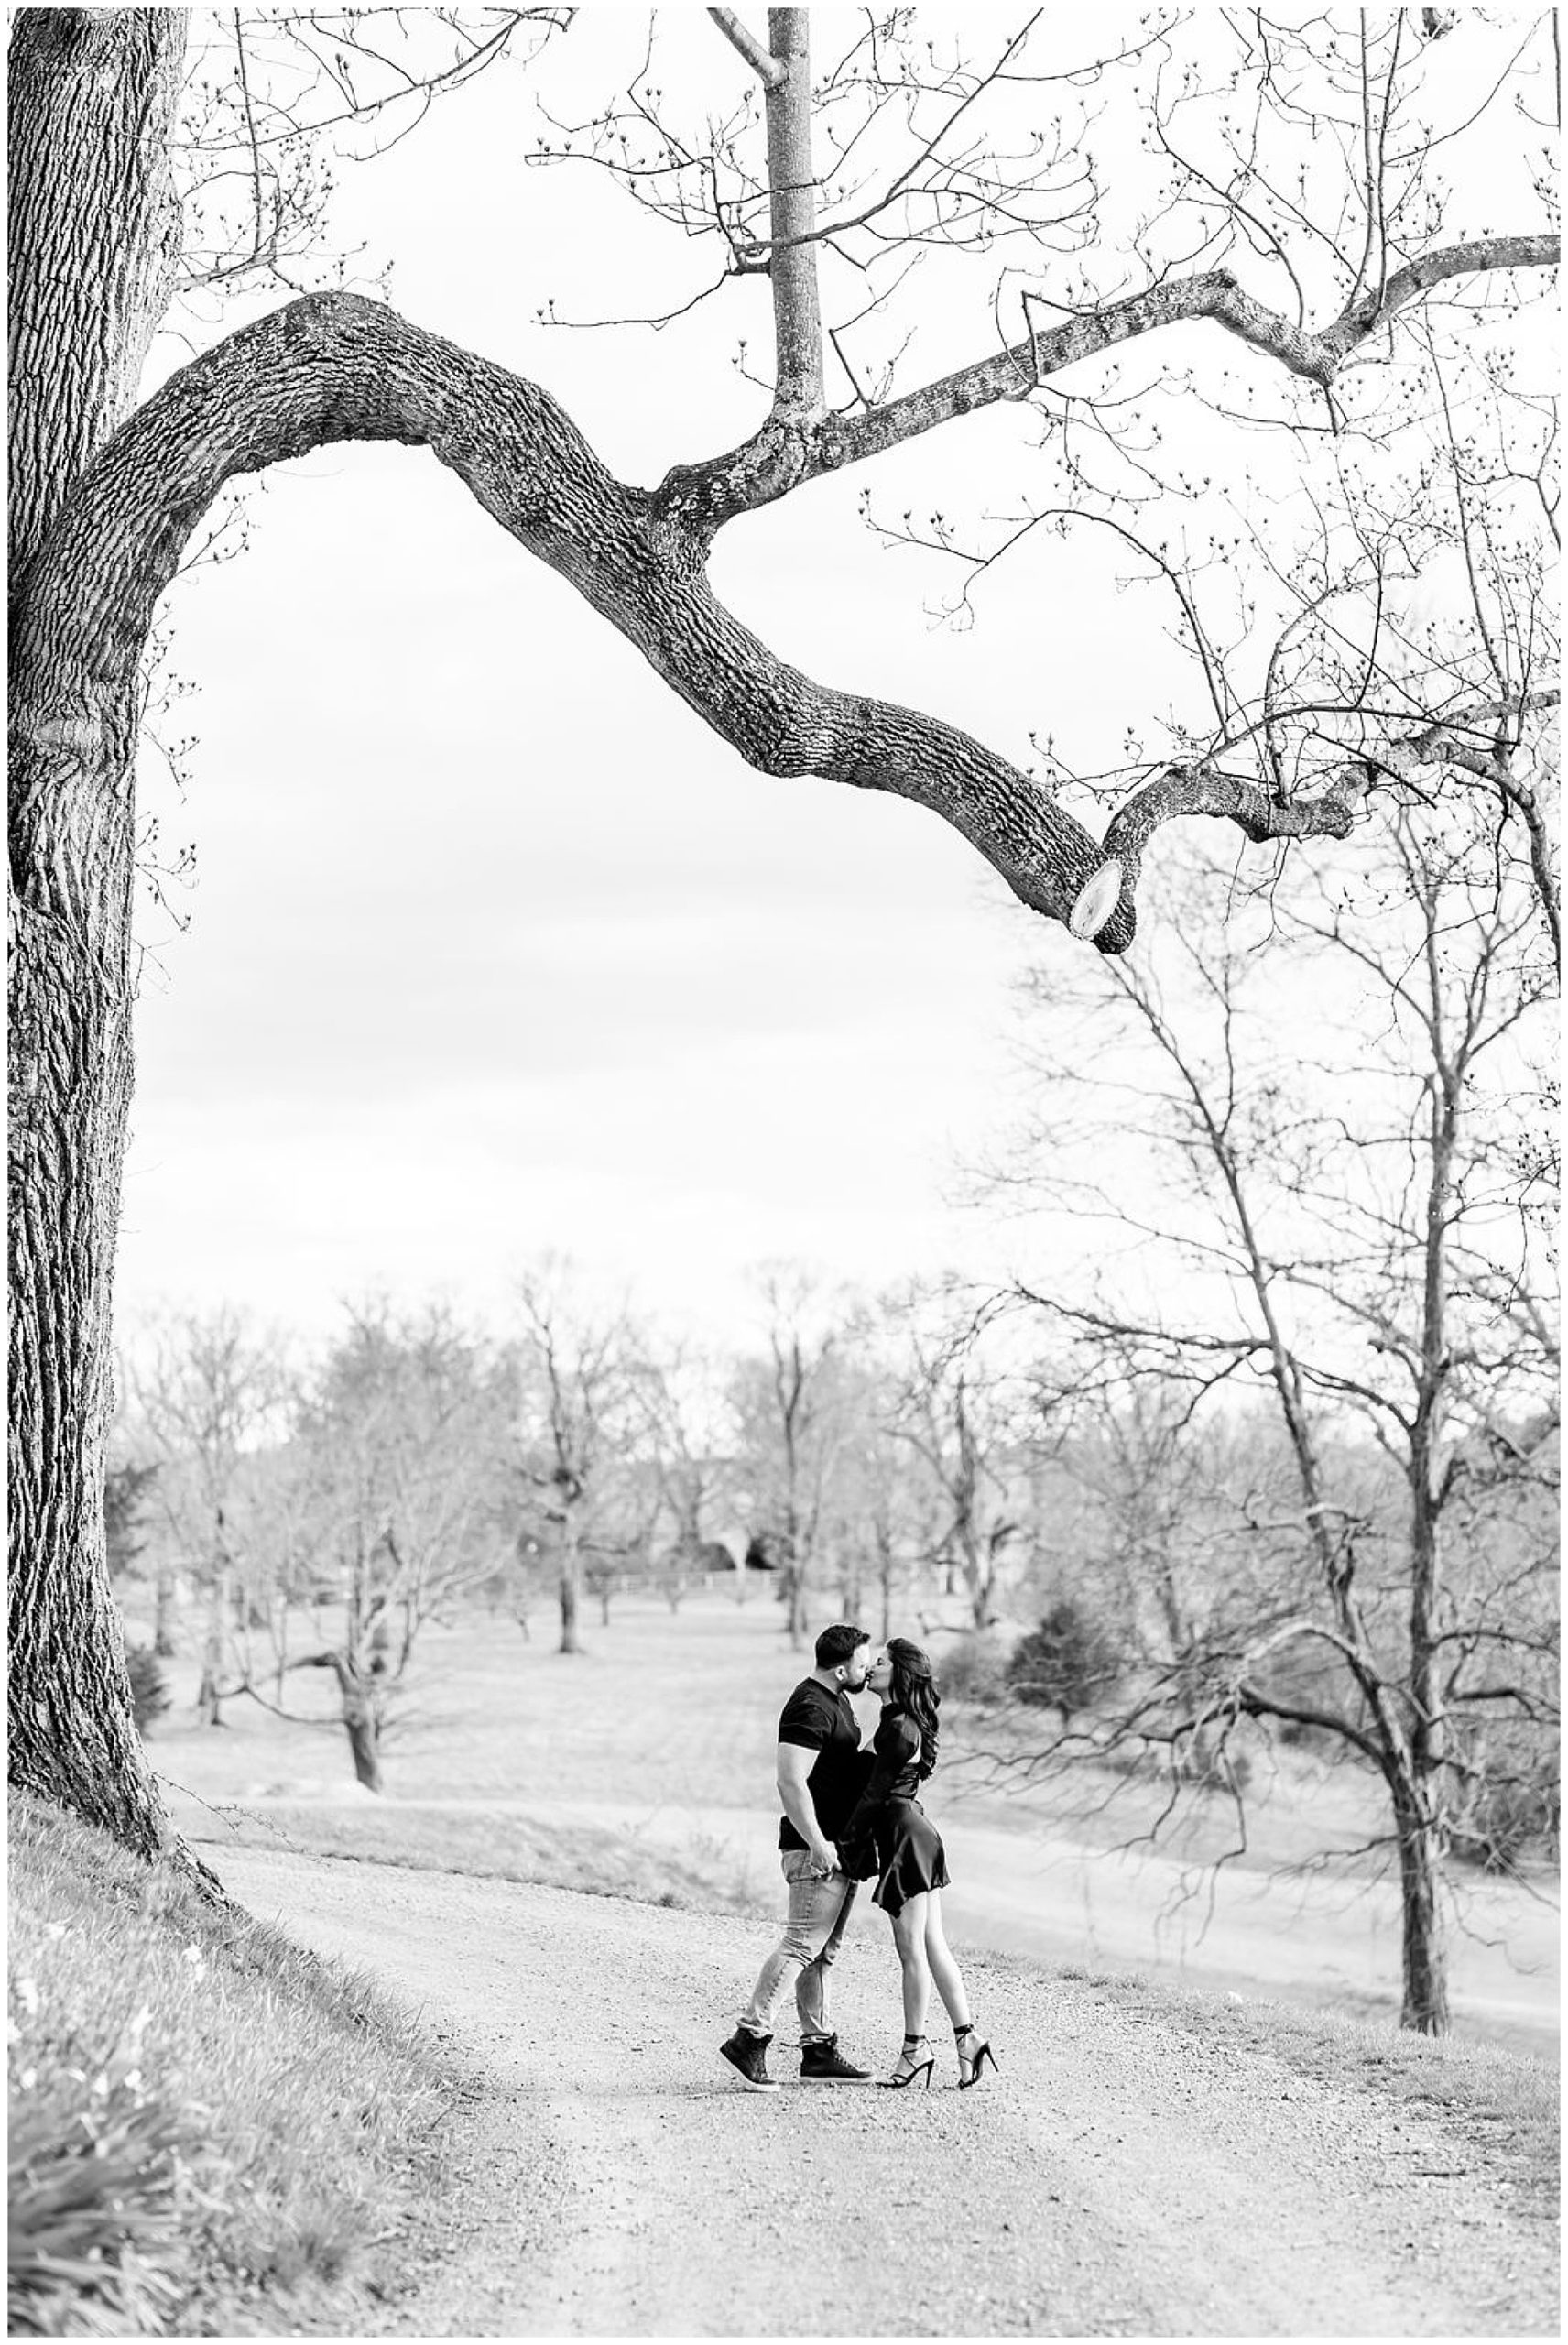 Oatlands Leesburg engagement photos, Leesburg wedding photographer, Leesburg photographer, Otlands engagement photos, DC engagement photographer, DC wedding photographer, spring engagement photos, sexy engagement photos, Rachel E.H. Photography, black and white, couple kissing under tree, stone pathway